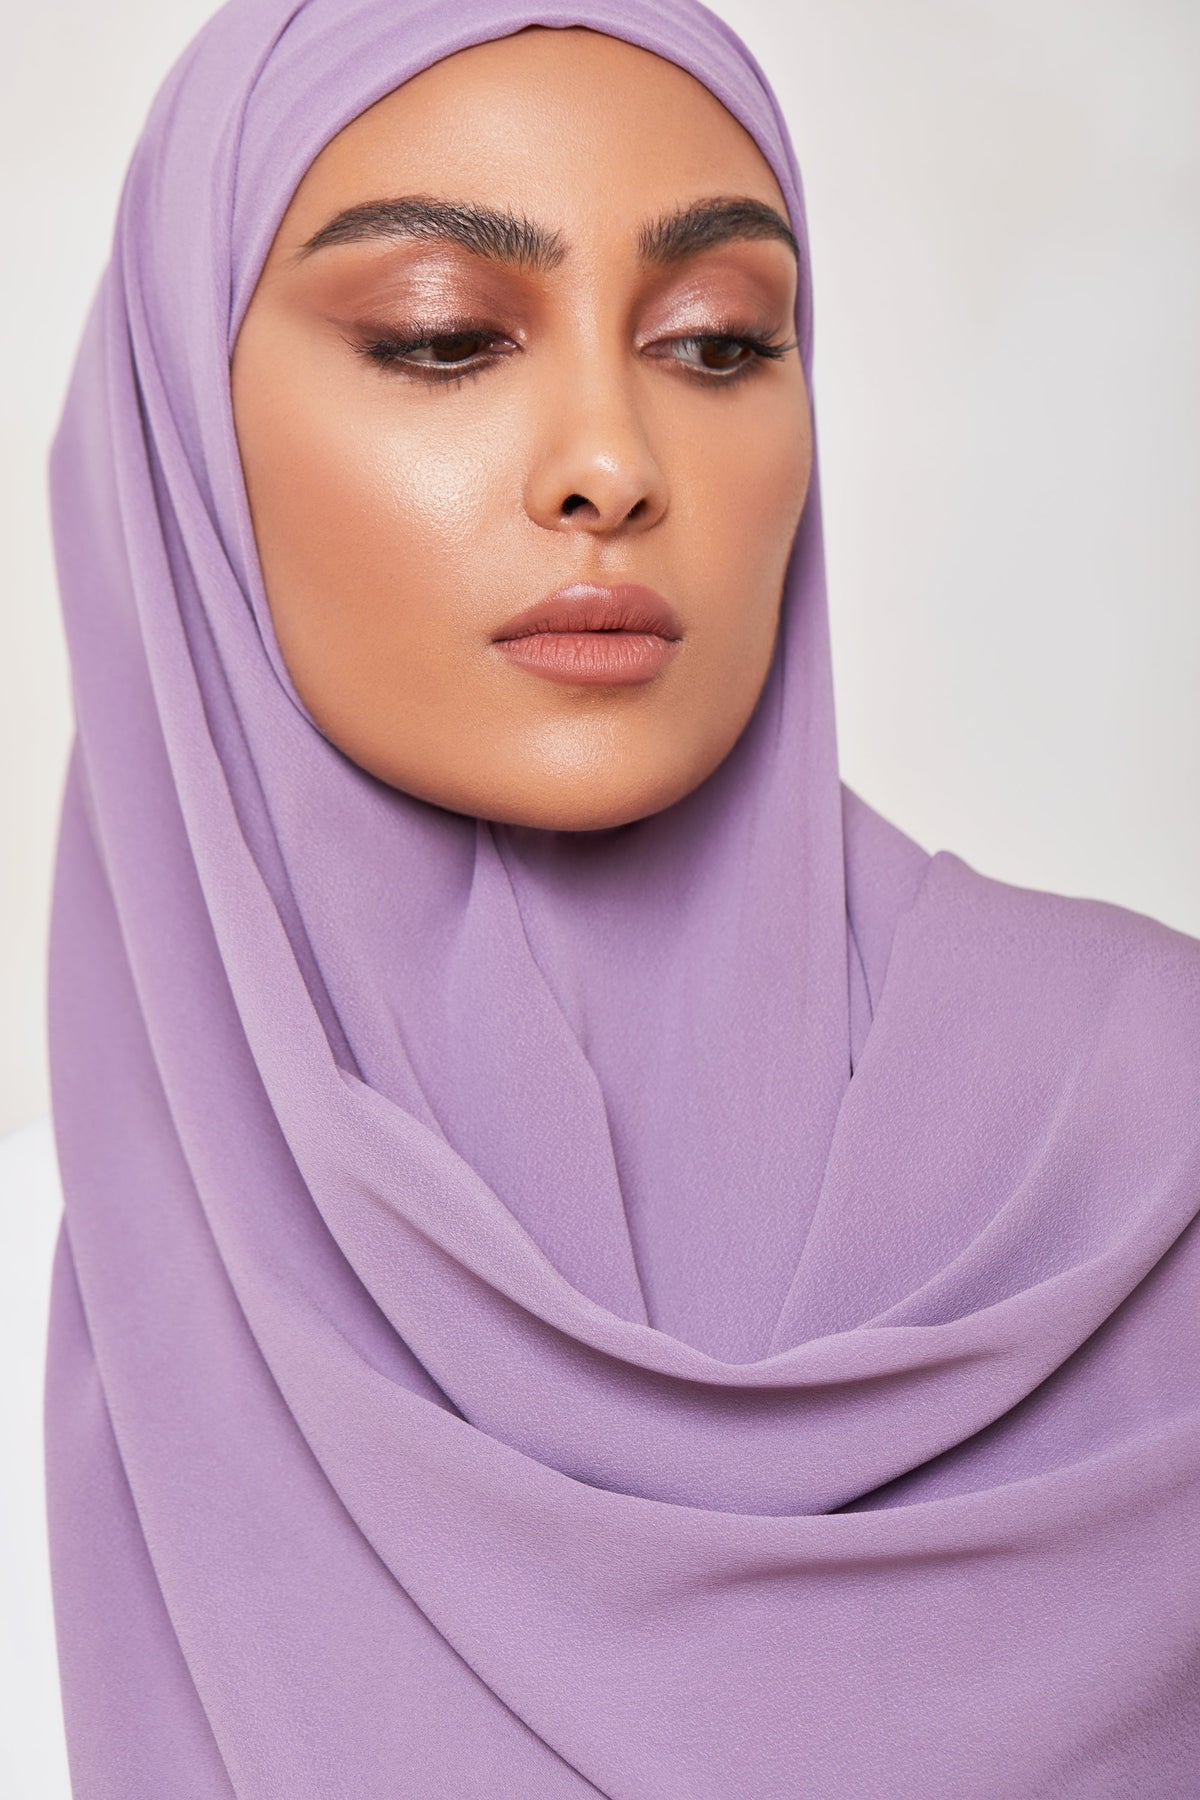 TEXTURE Everyday Chiffon Hijab - Poised in Purple Veiled Collection 